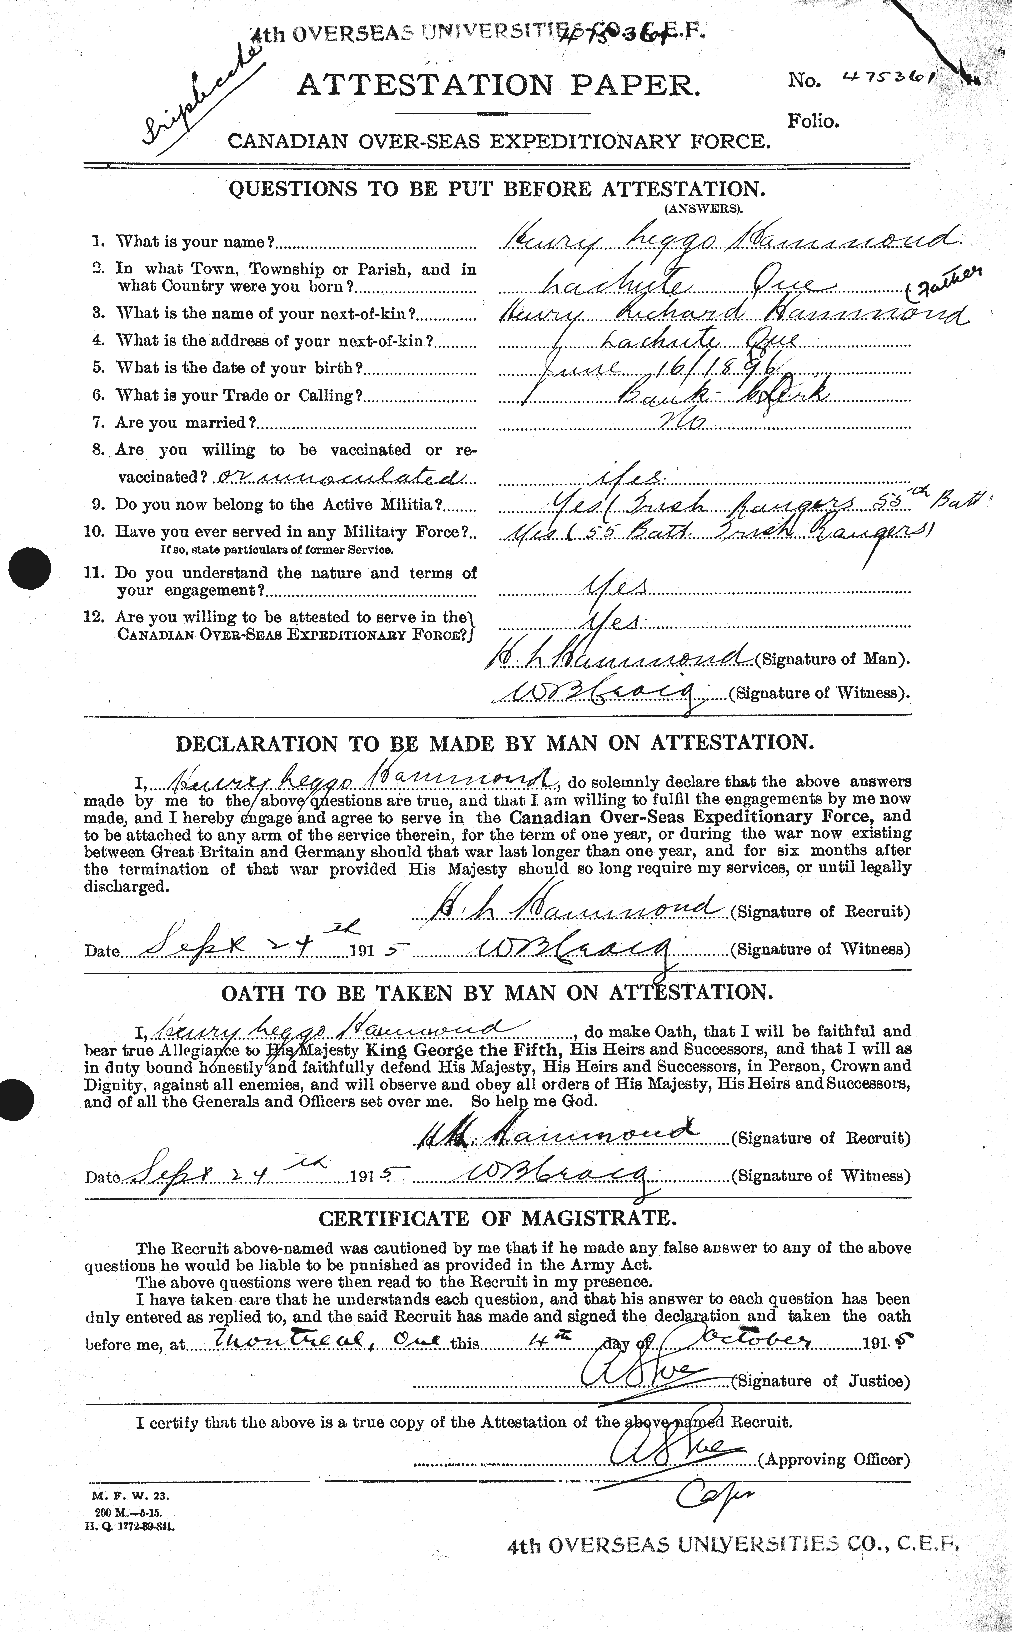 Personnel Records of the First World War - CEF 373389a